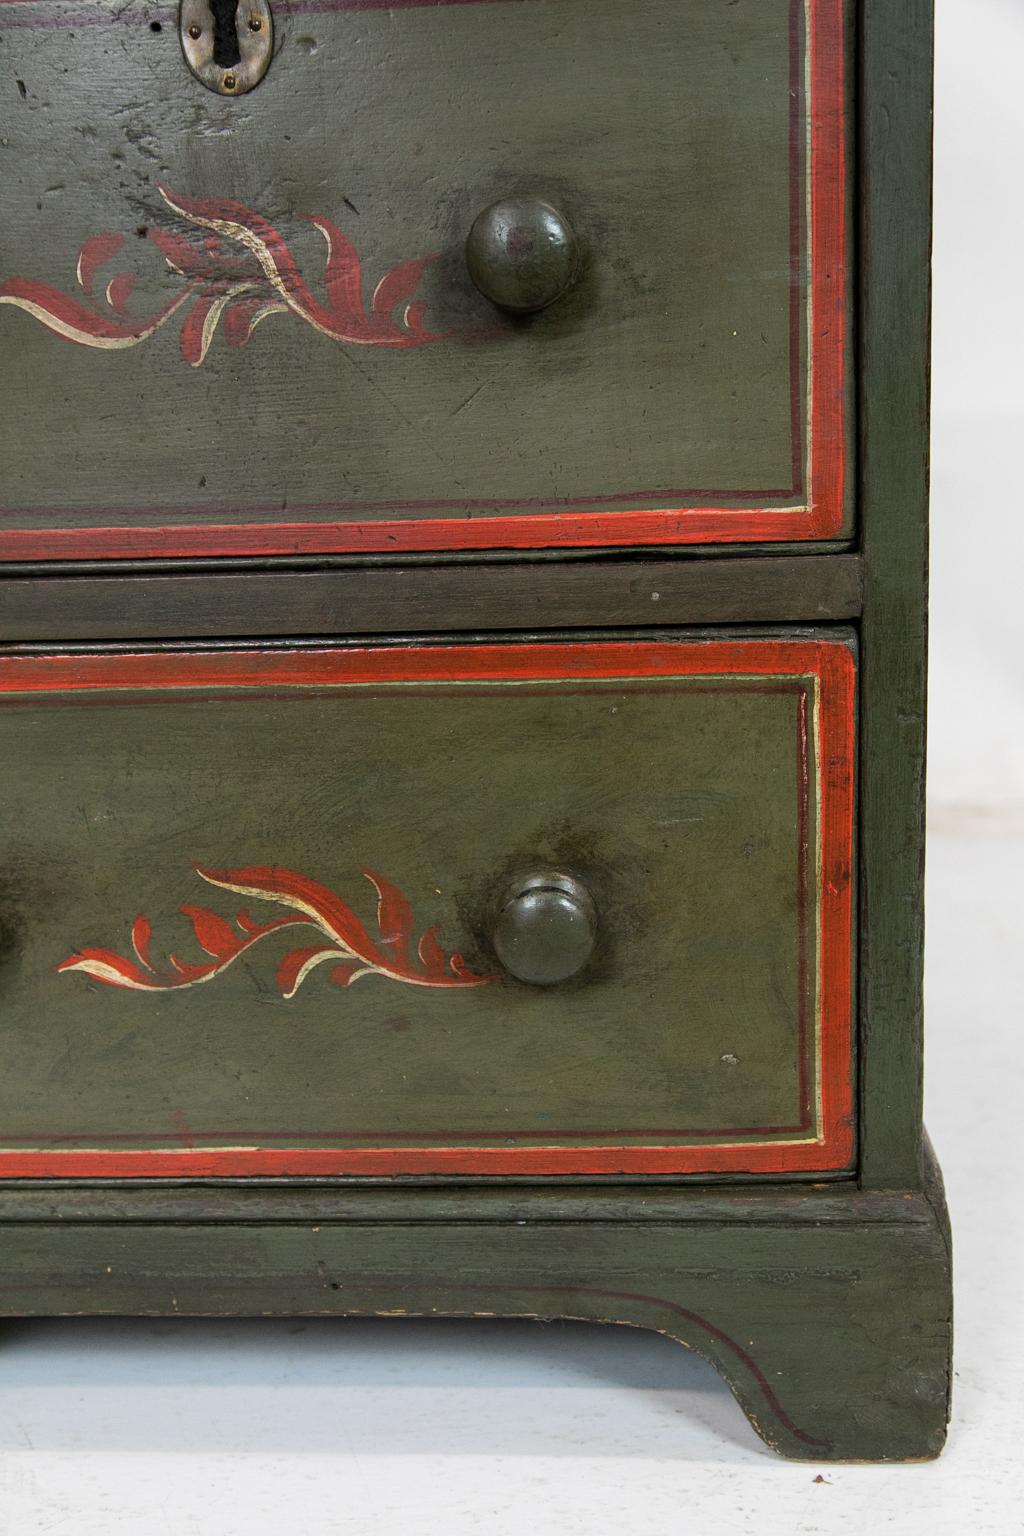 This chest has three drawers that are painted with red and white leaf designs. The top, drawer fronts, and sides are painted with red banding and the sides have recessed panels. The center drawer has an oval brass escutcheon. The inside lock mortise